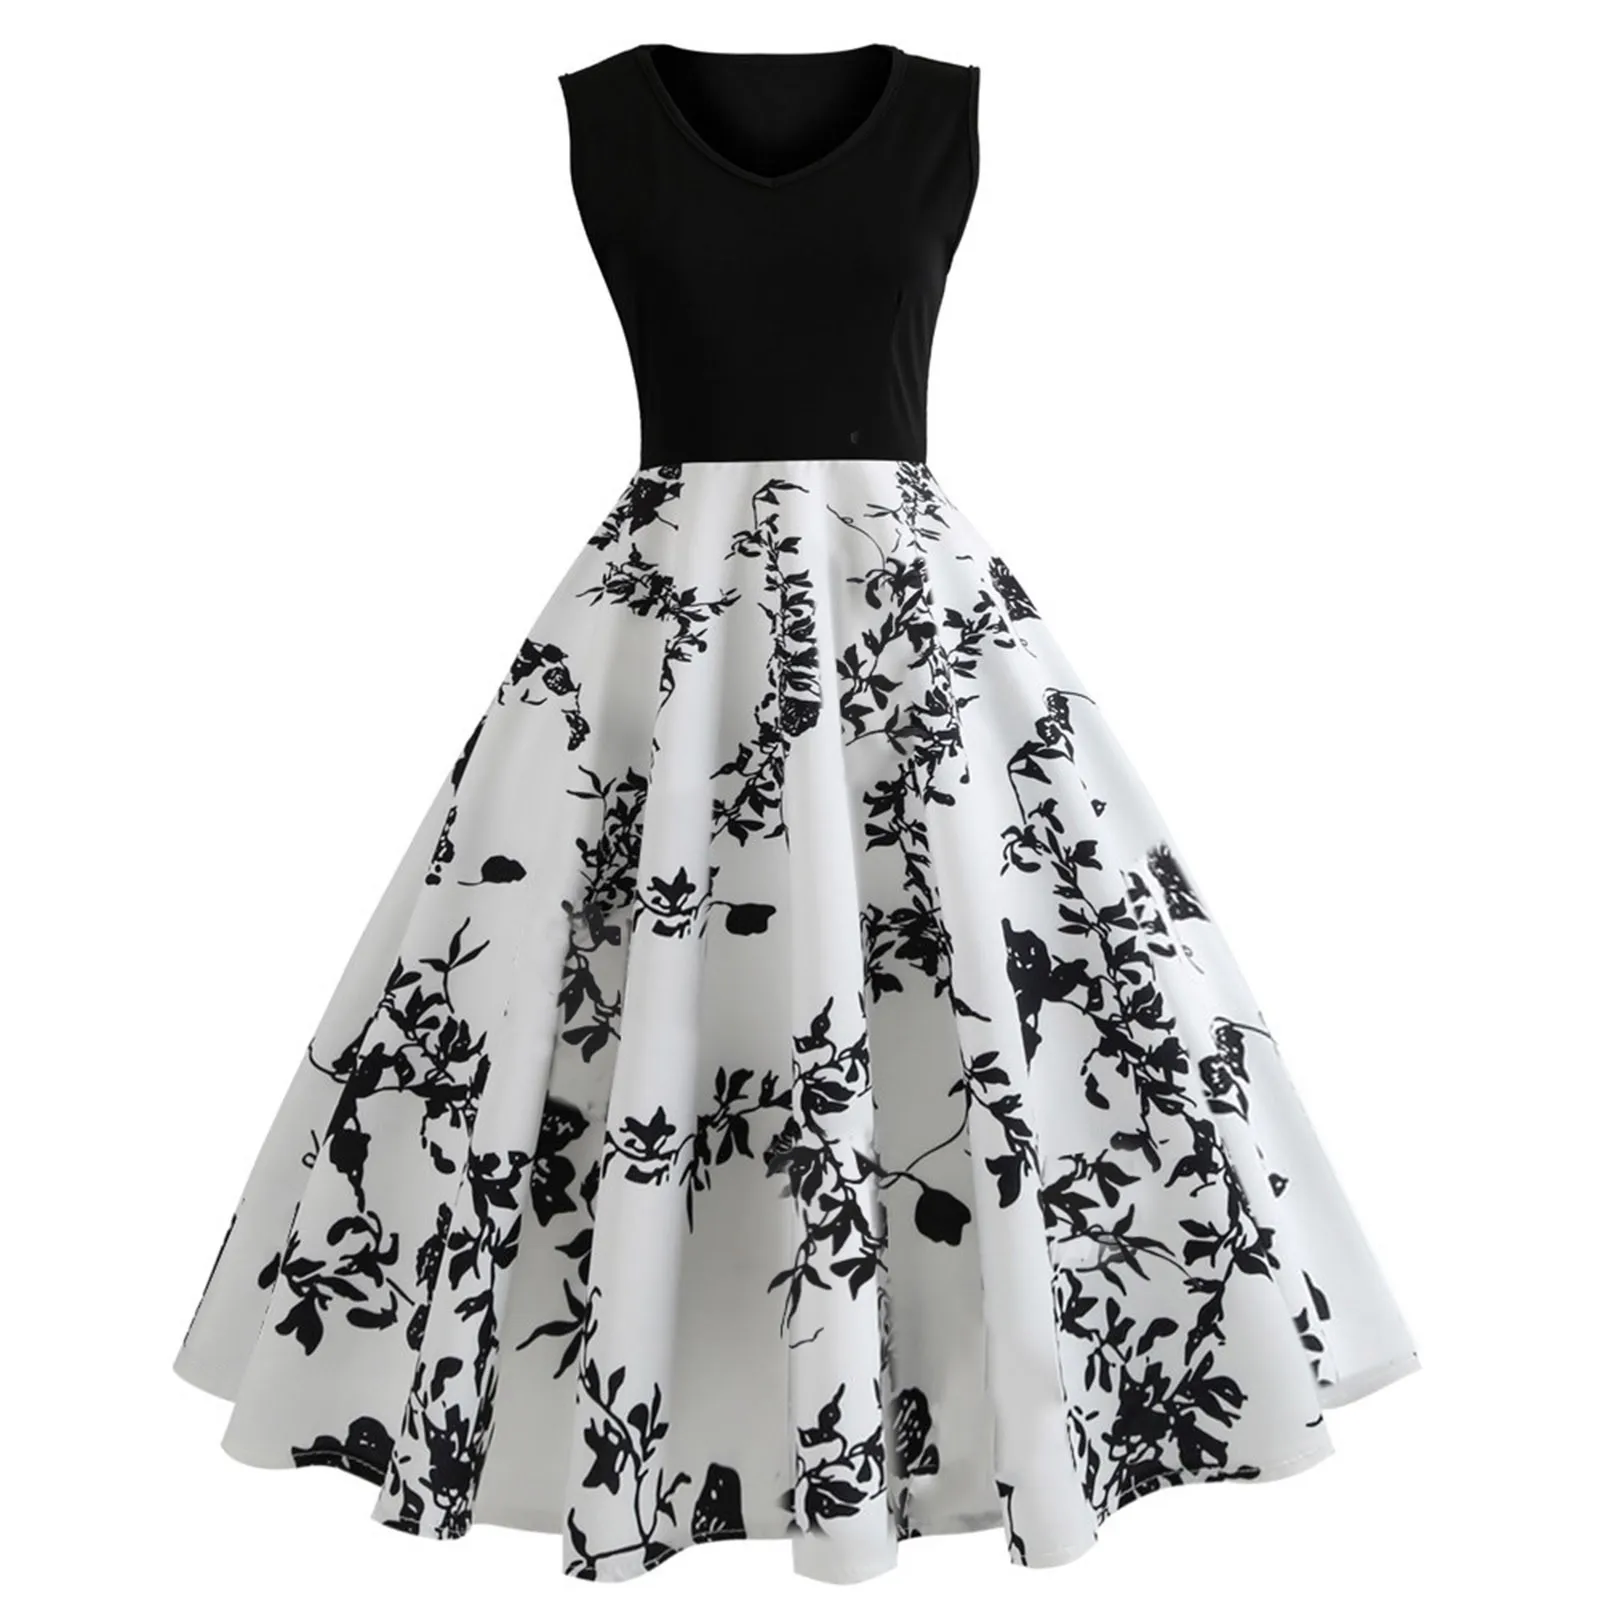 Sashes 50S 60S Vintage Dresses for Women Elegant Sleeveless Casual Floral Print Party Prom Hepburn Dress 